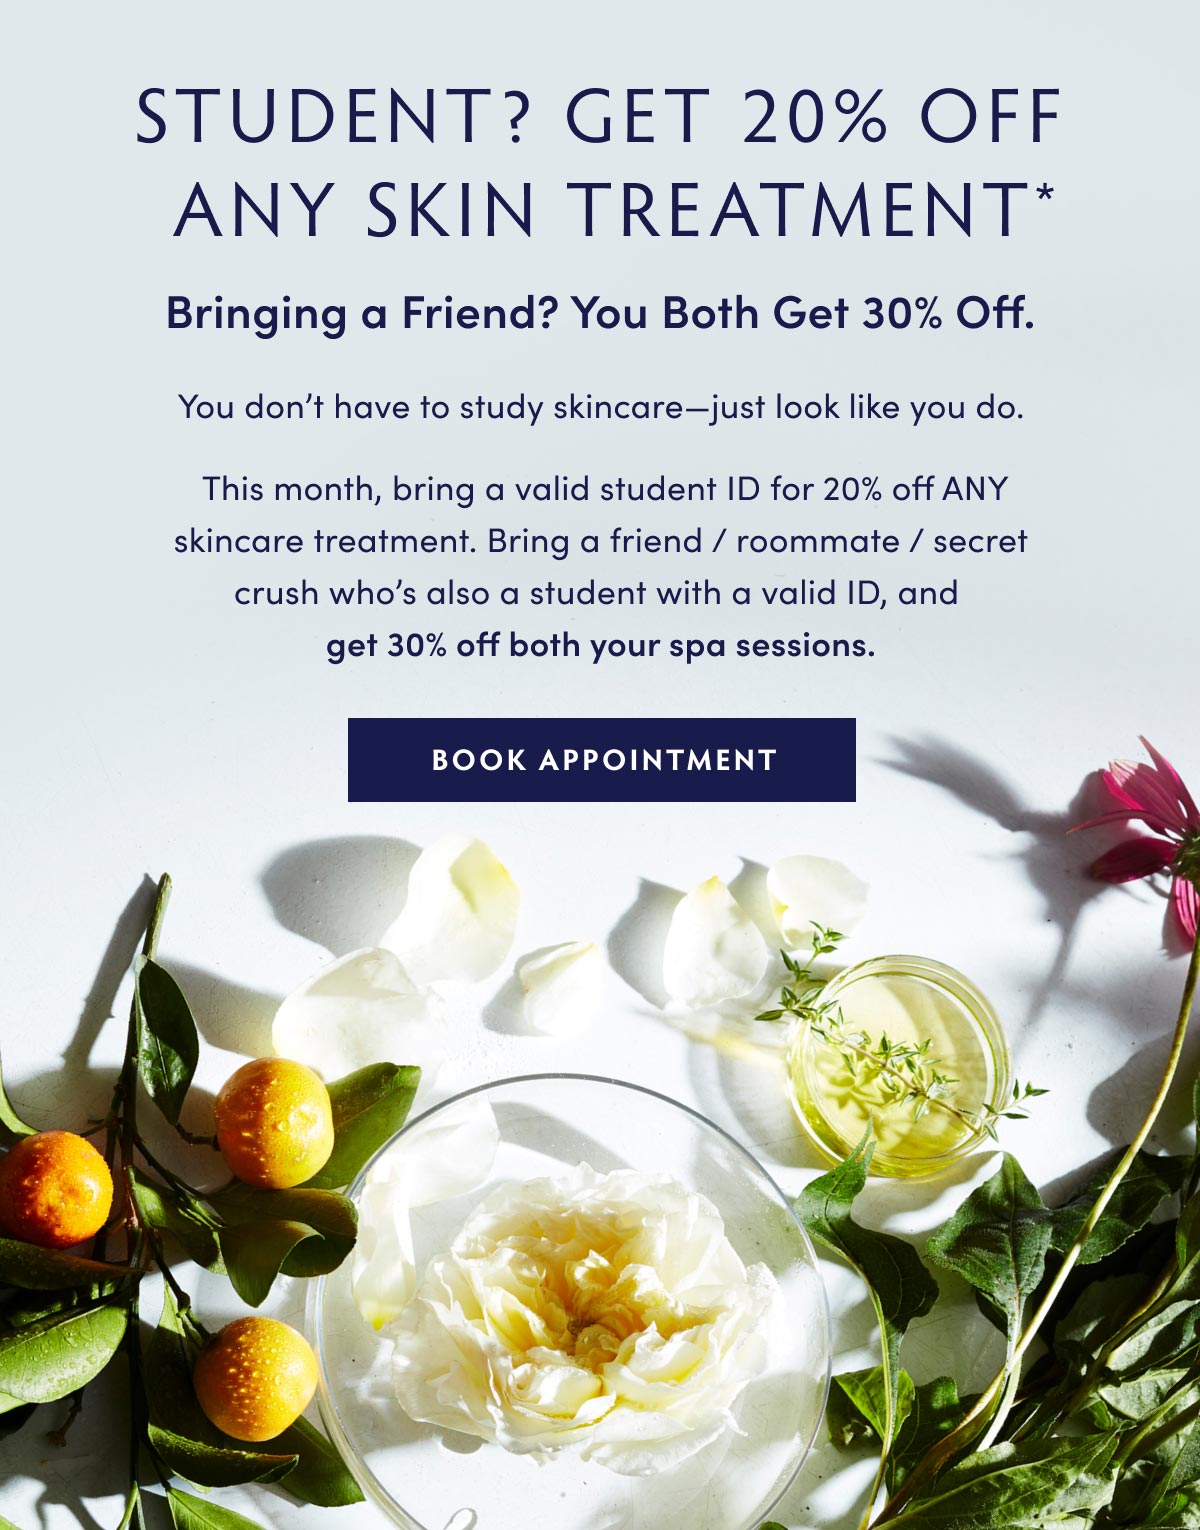 STUDENT? GET 20% OFF ANY SKIN TREATMENT